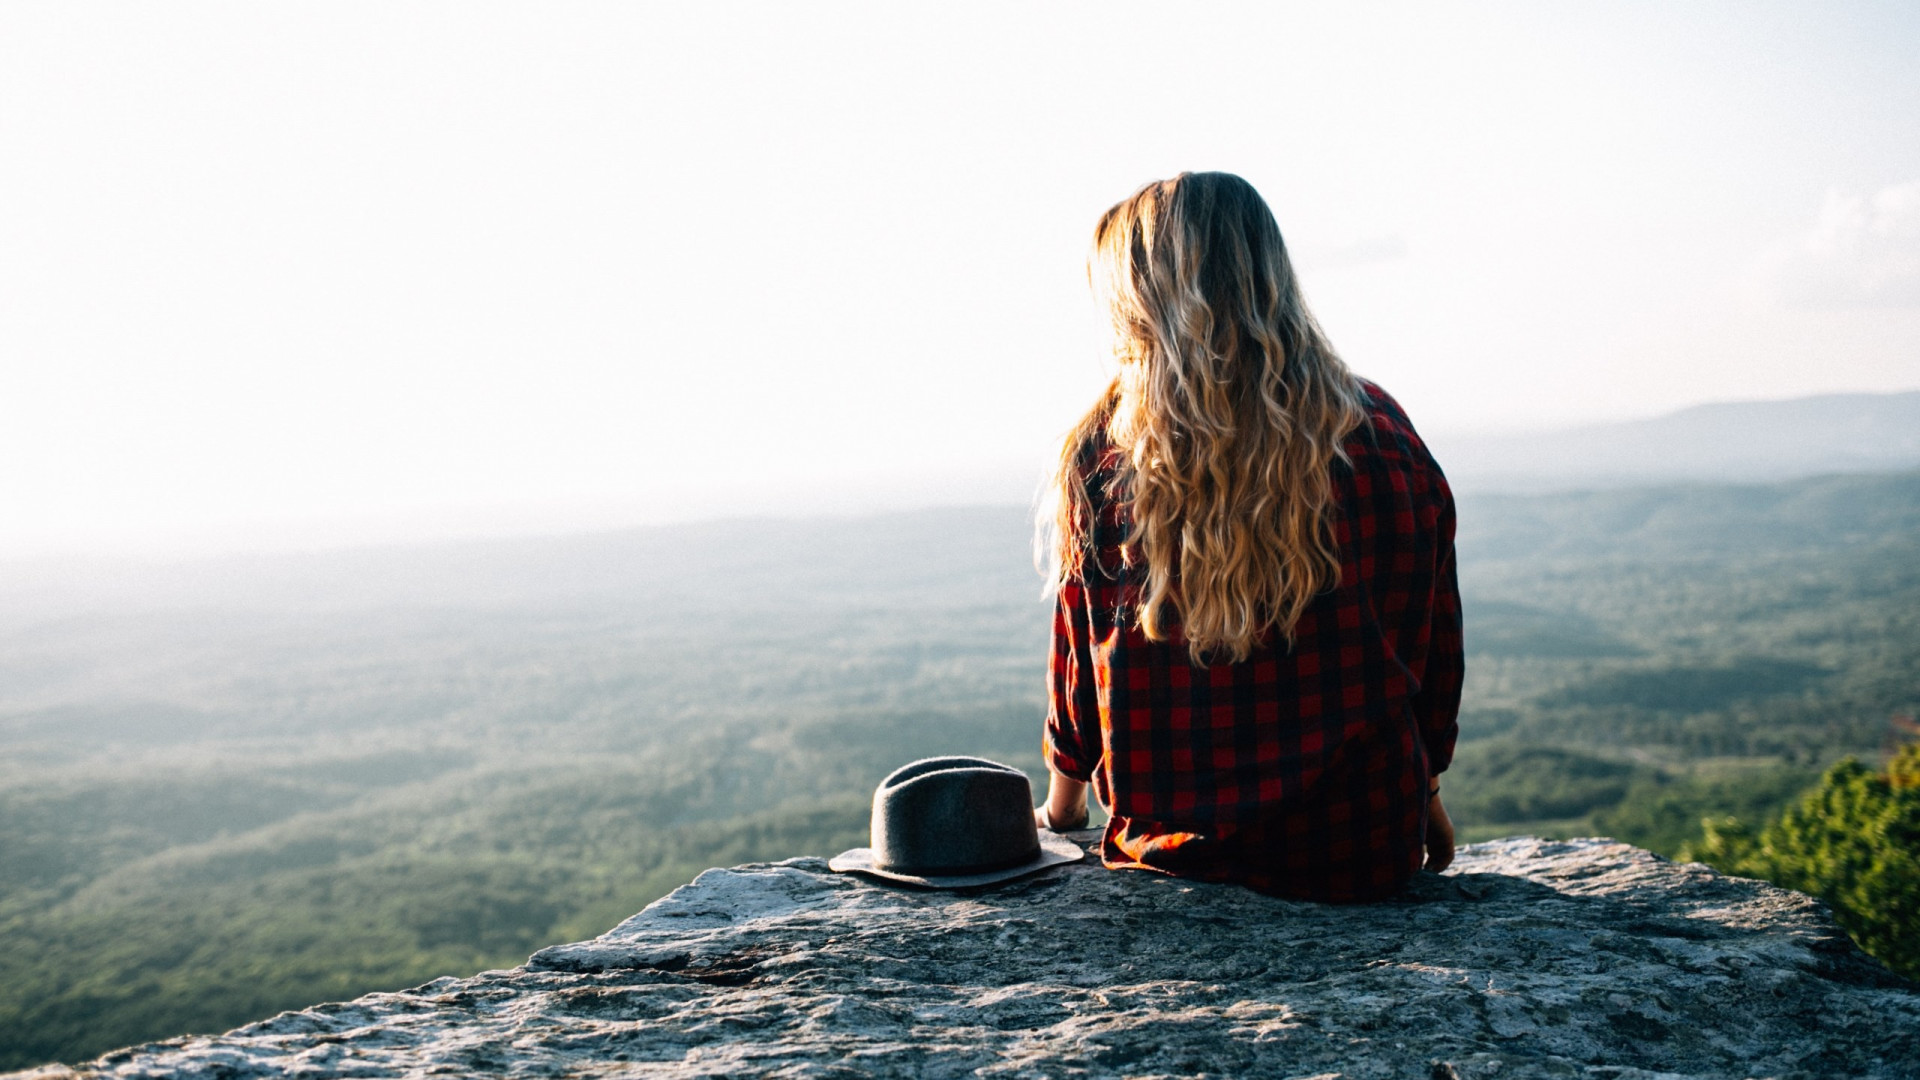 Lady admiring the natural view from Cheaha Mountains, USA wallpaper 1920x1080